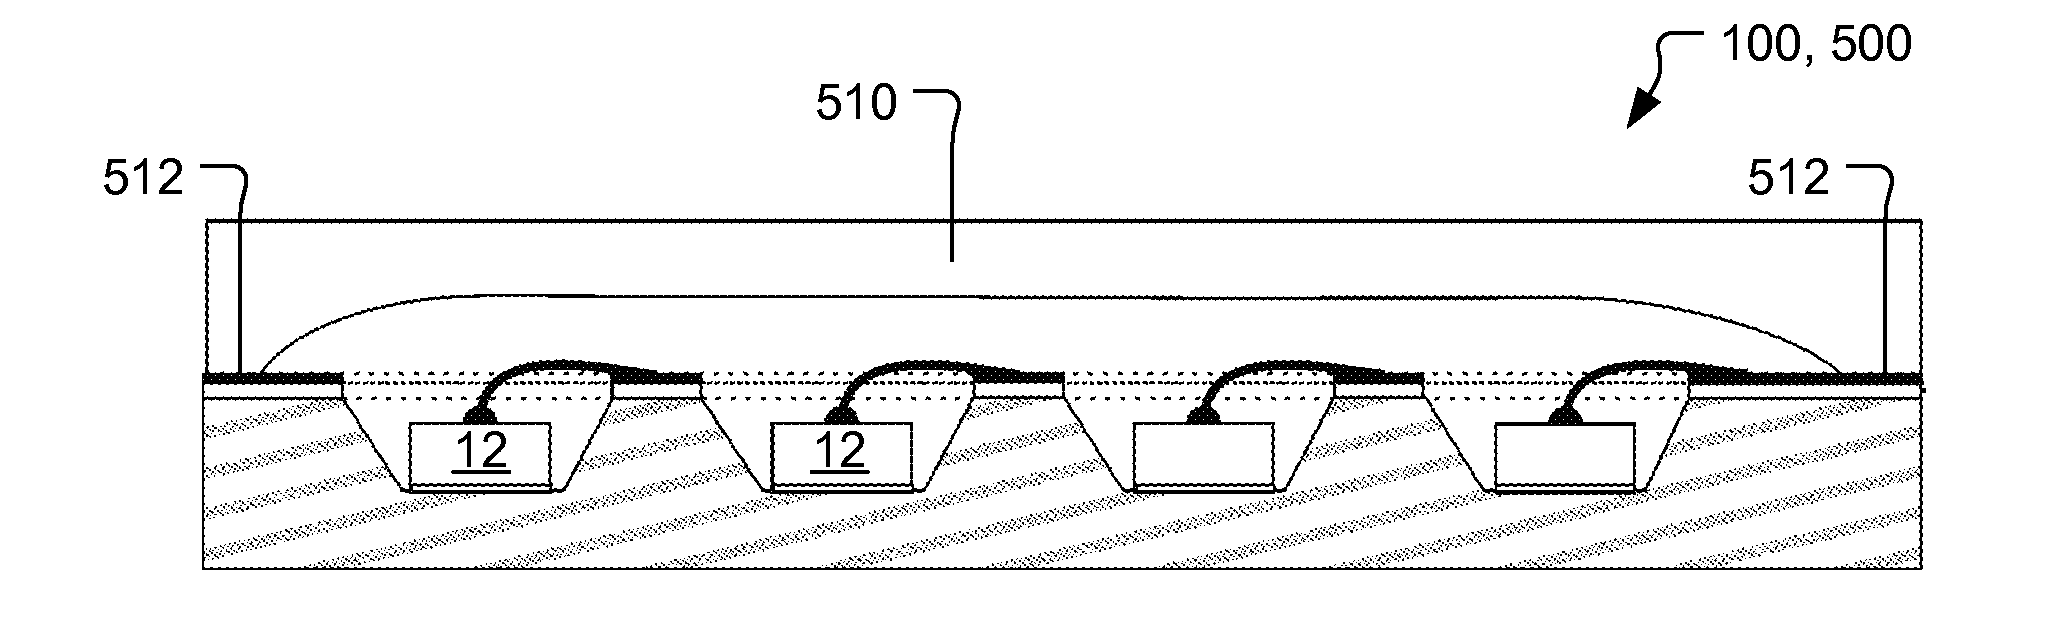 Light-emitting diode package assembly